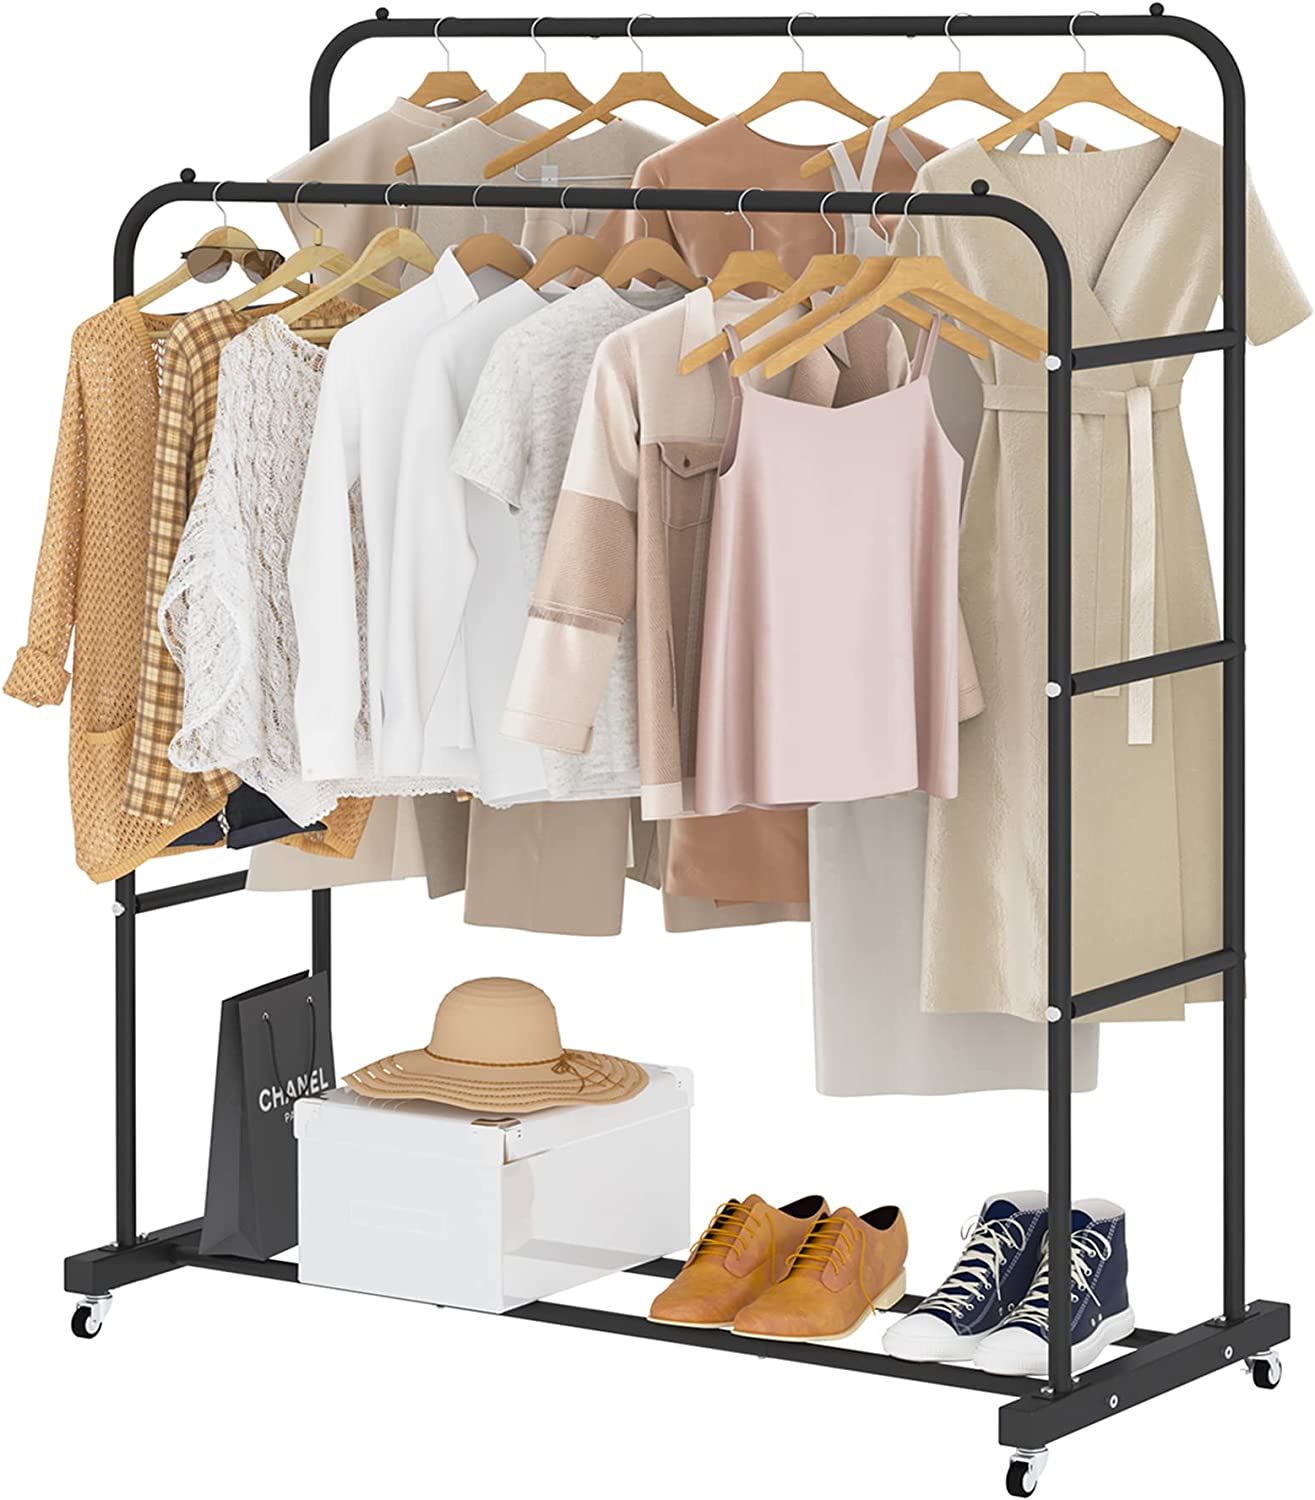  JIUYOTREE Metal Clothing Rack, 43.3 Inches Garment Rack with  Bottom Shelf for Hanging Clothes, Coats, Skirts, Shirts, Sweaters, Black :  Home & Kitchen